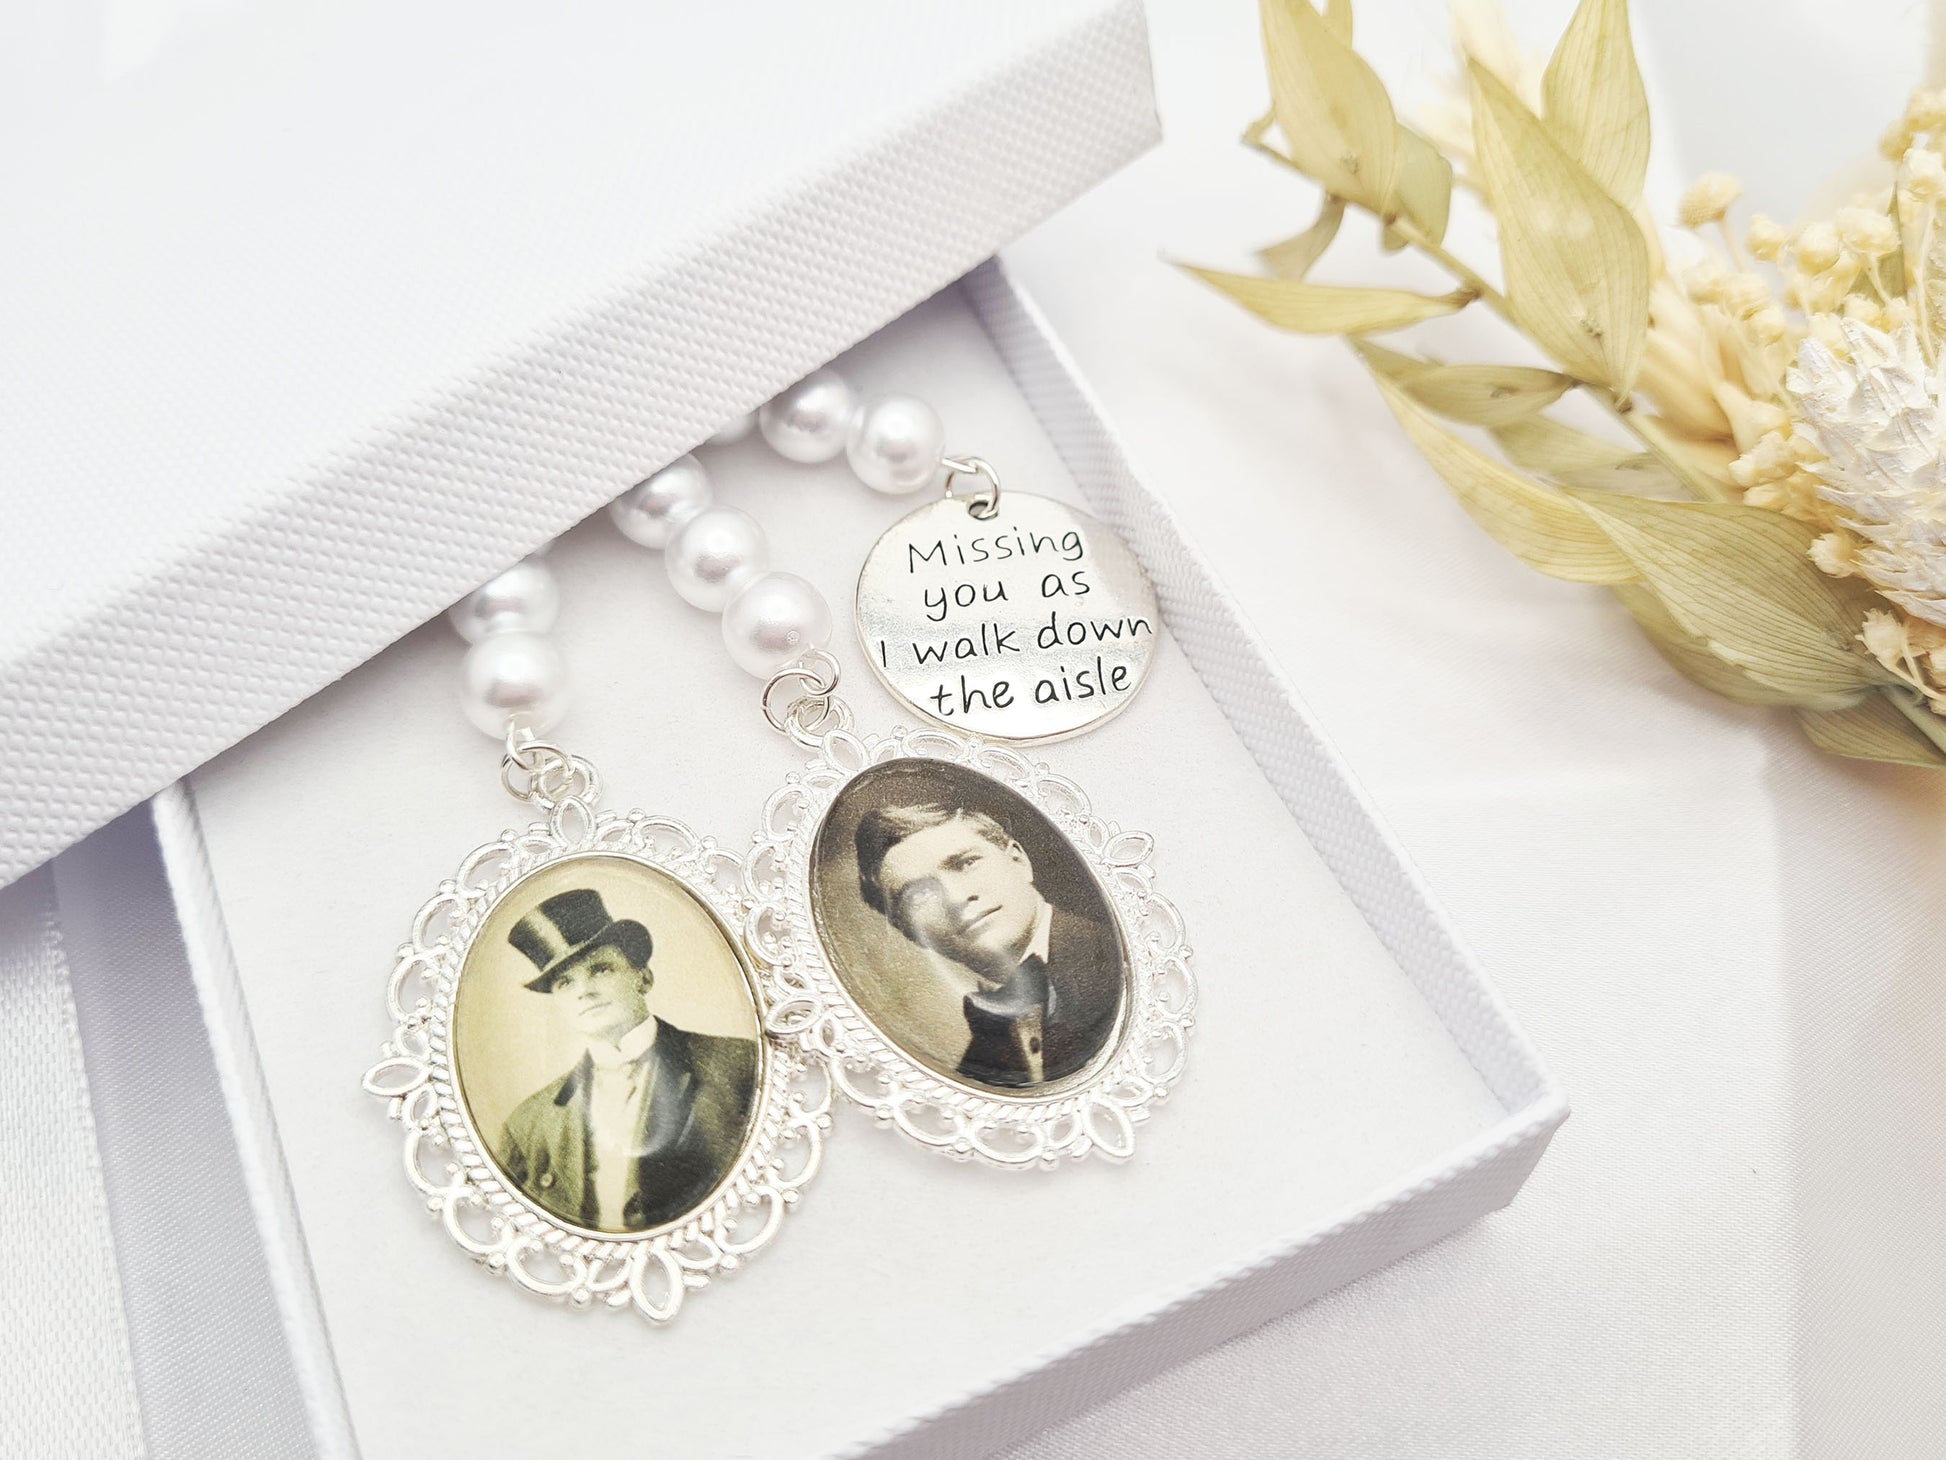 Wedding Bouquet Charms with Photos and White Pearls